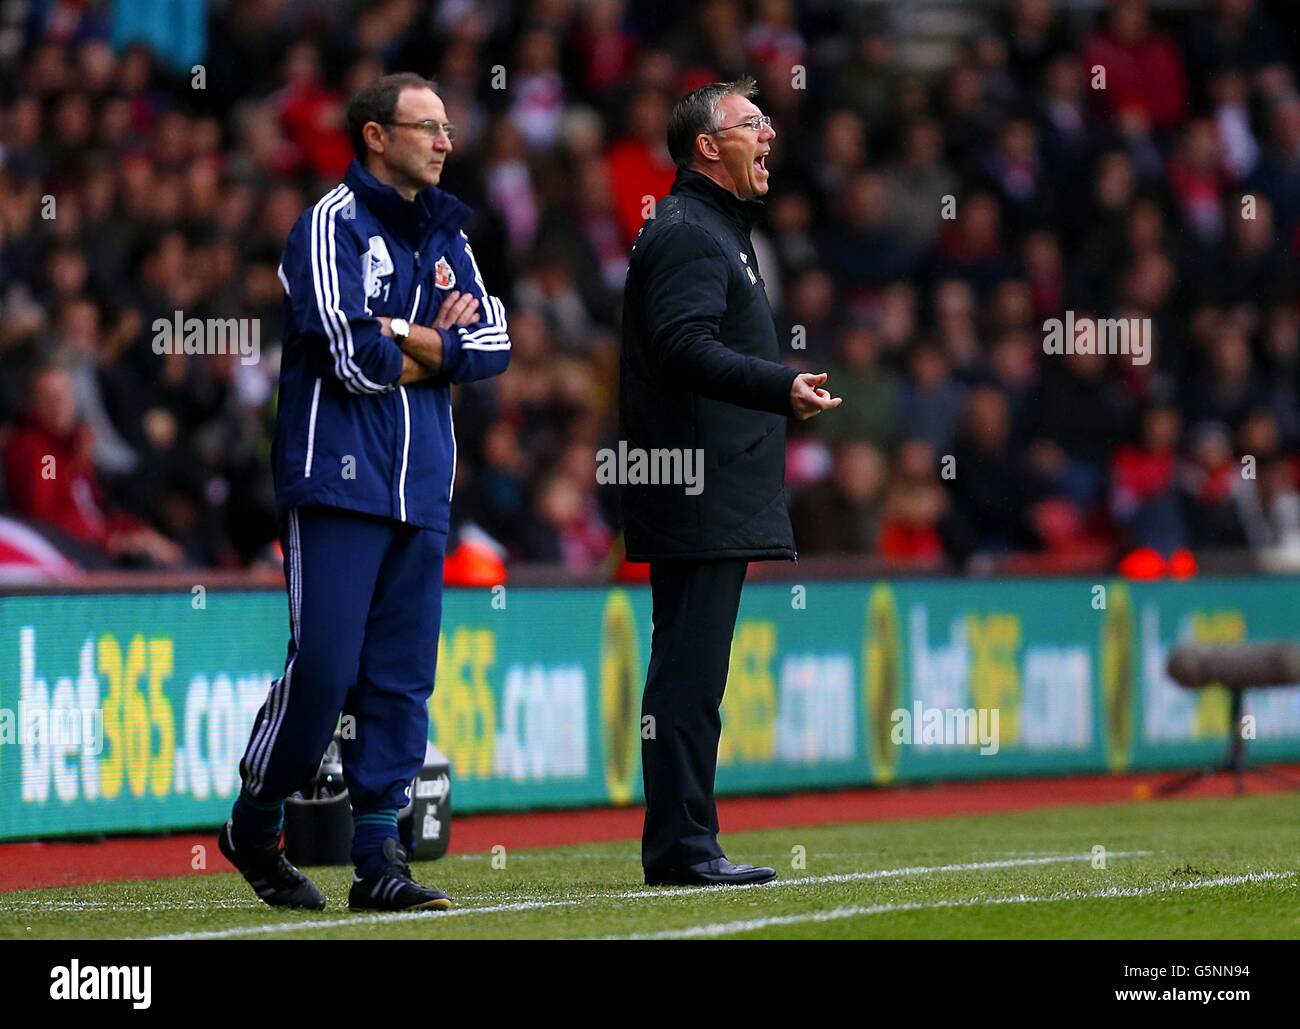 Soccer - Barclays Premier League - Southampton v Sunderland - St Mary's. Southampton manager Nigel Adkins (right) and Sunderland manager Martin O'Neill on the touchline Stock Photo